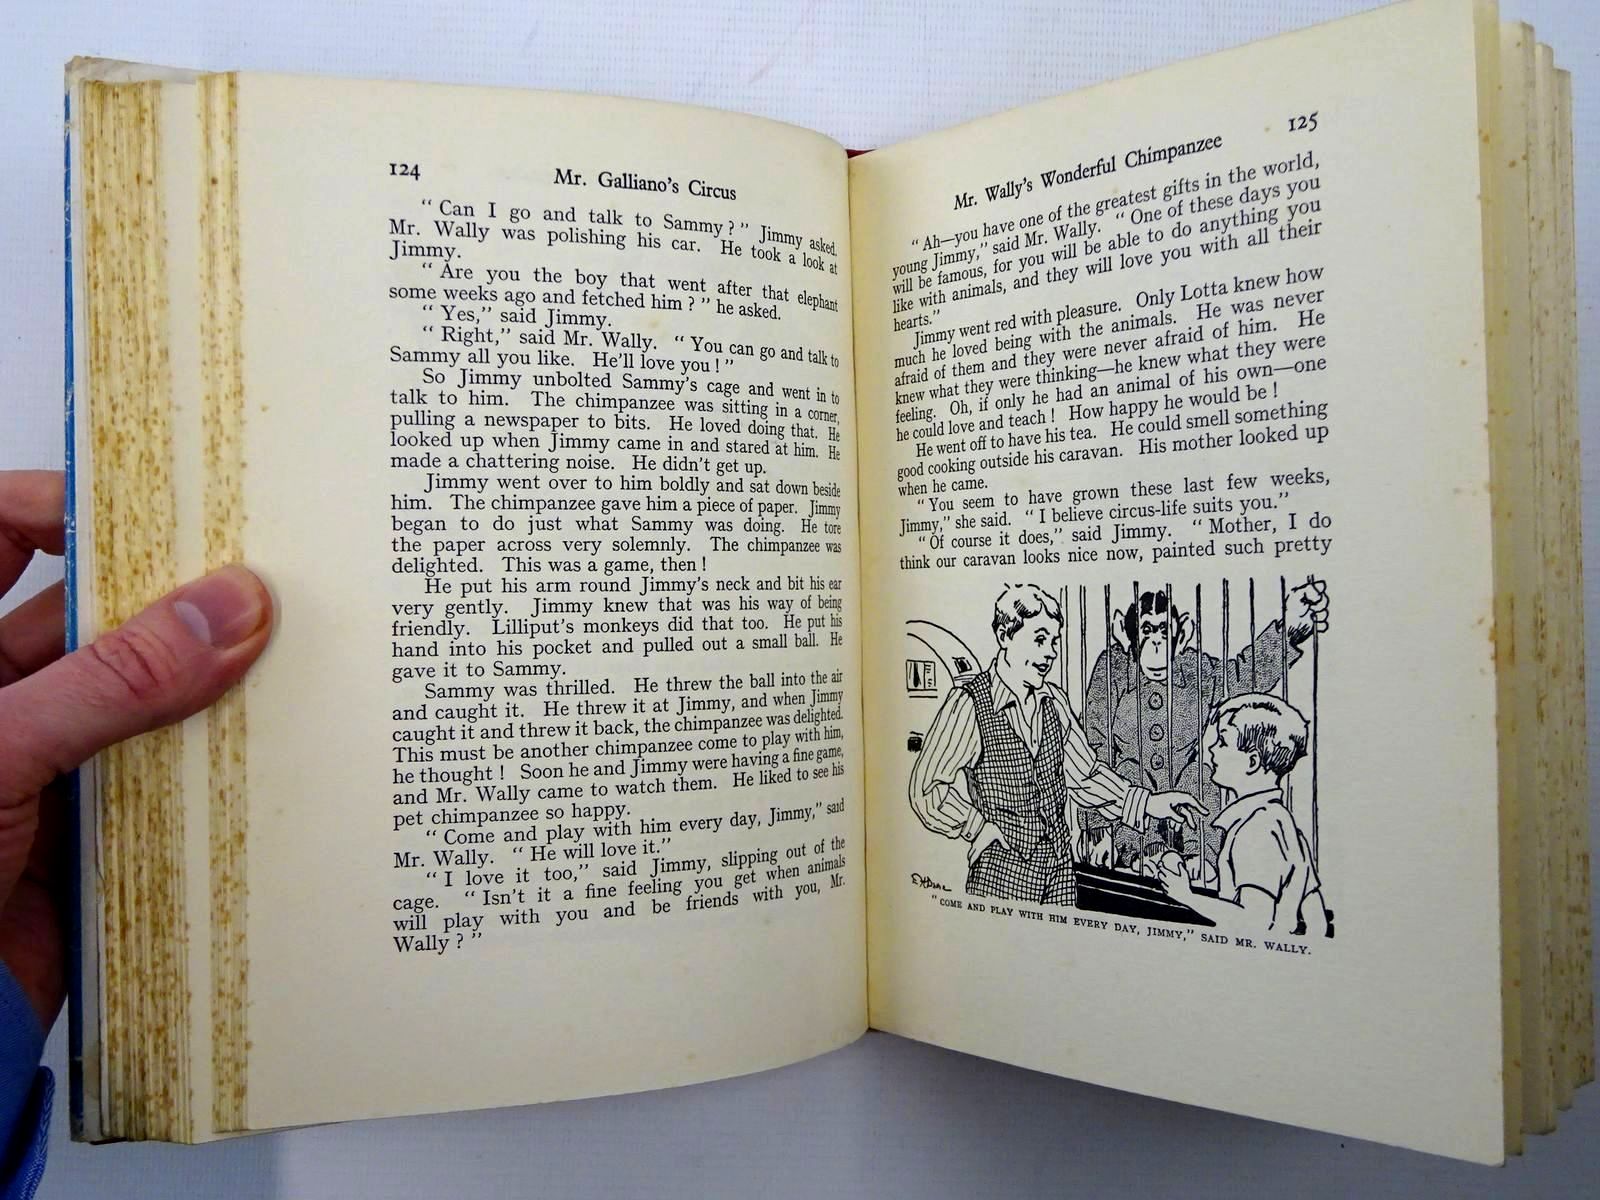 Photo of MR. GALLIANO'S CIRCUS written by Blyton, Enid illustrated by Davie, E.H. published by George Newnes Ltd. (STOCK CODE: 2125353)  for sale by Stella & Rose's Books